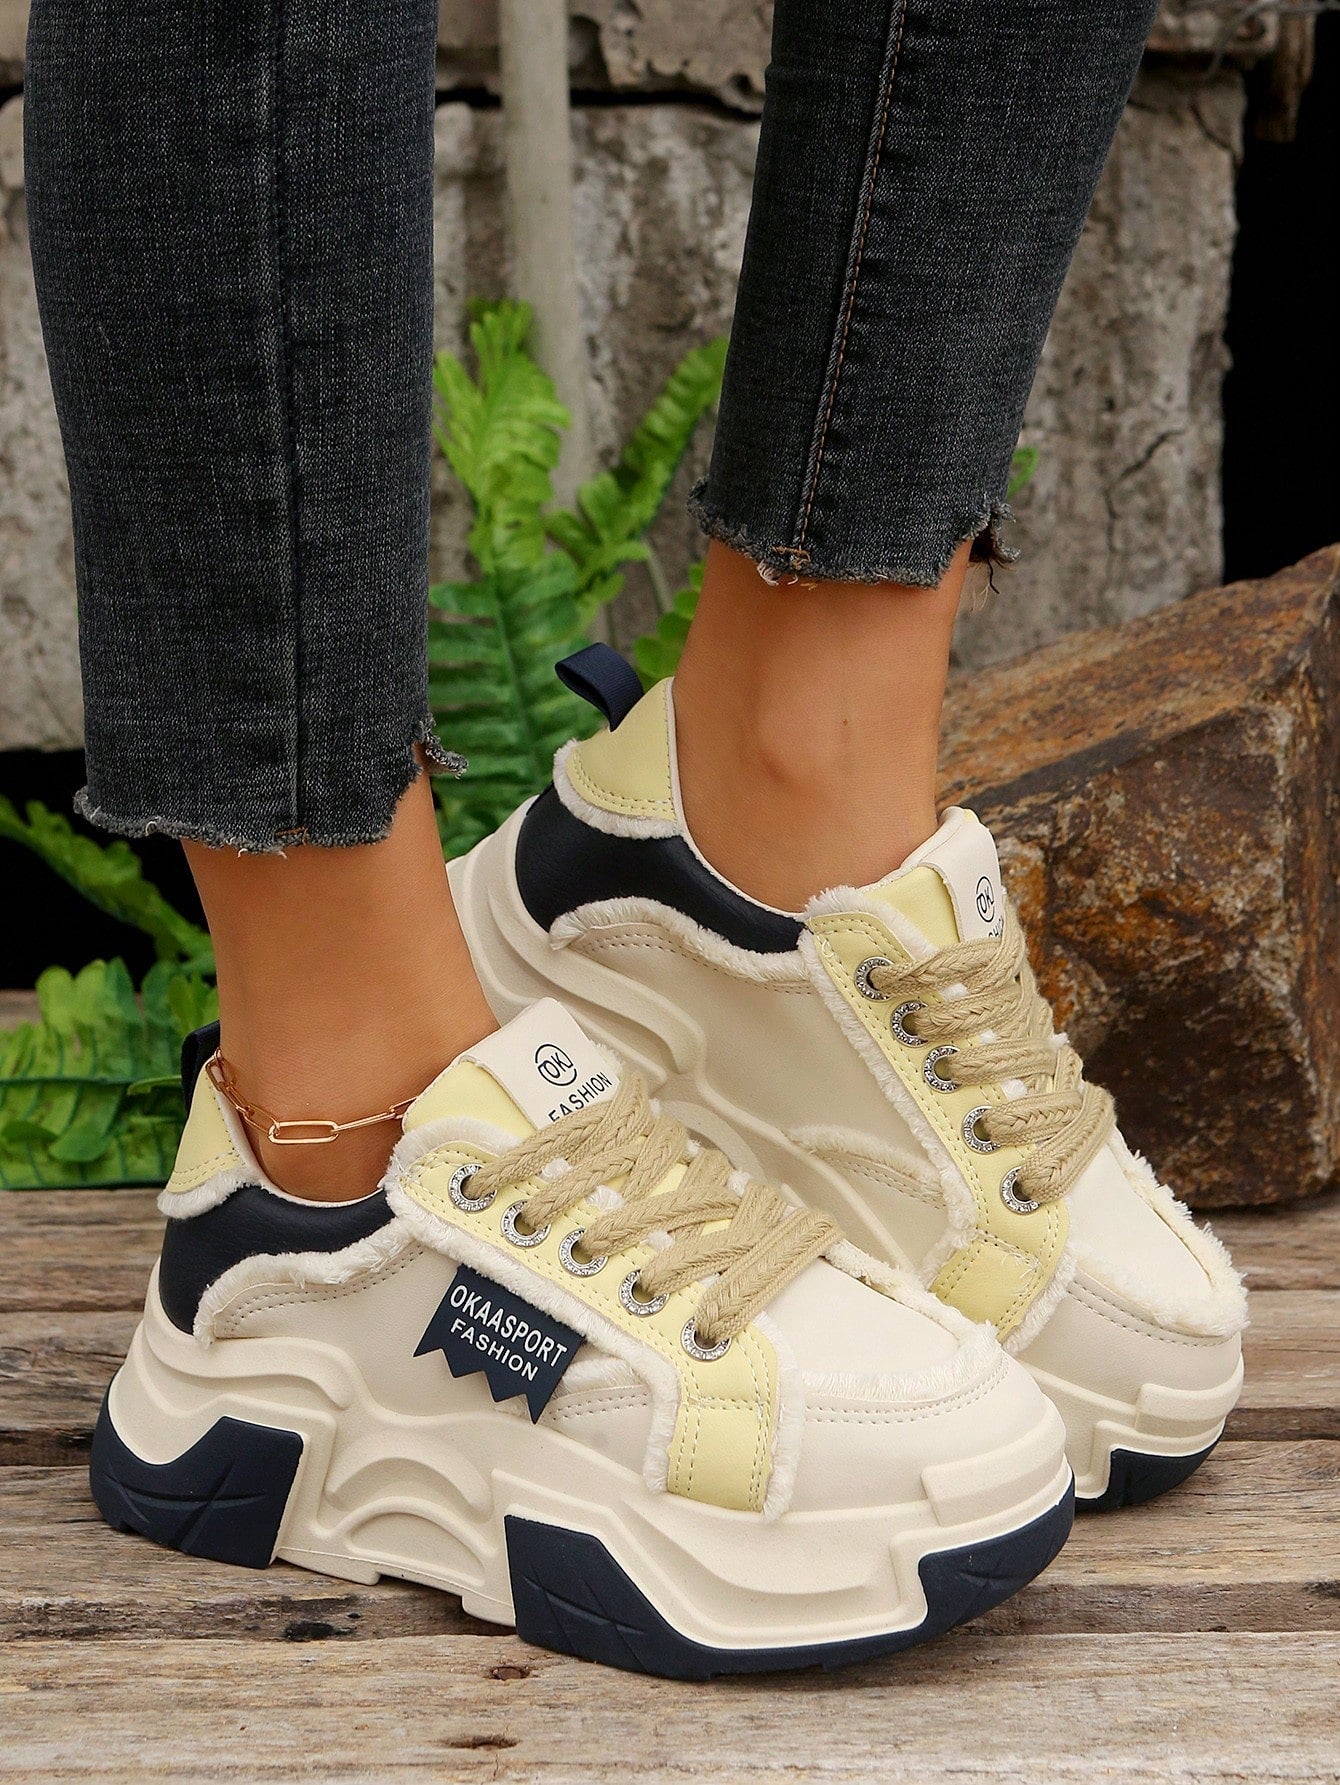 Women's Wedge Heel Thick Sole Sports Shoes With Hidden Heel, Fashionable And Versatile For Summer